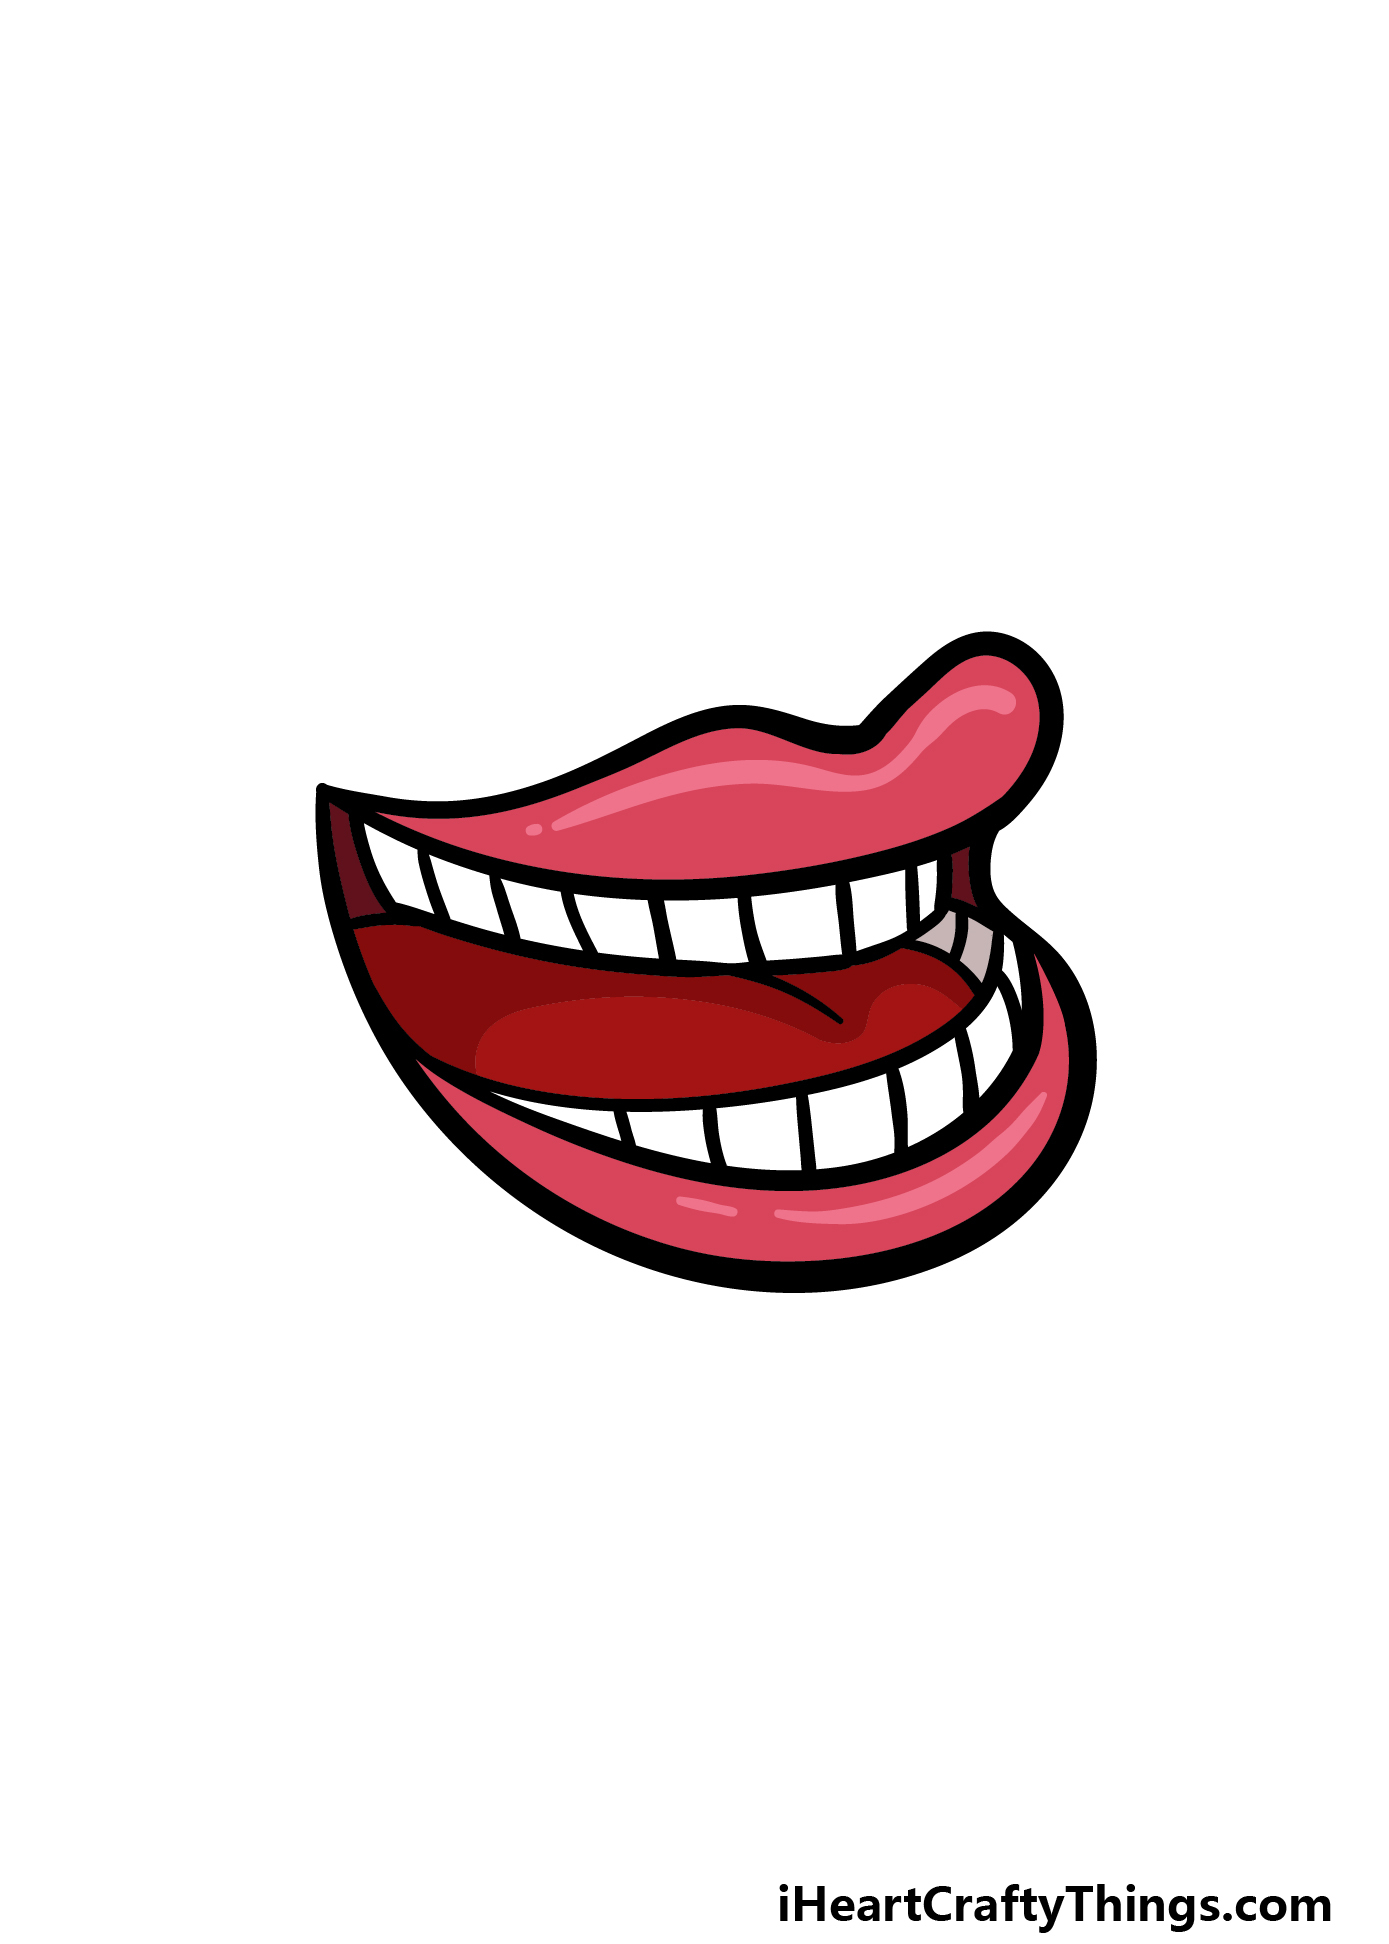 Cartoon Mouth Drawing - How To Draw A Cartoon Mouth Step By Step